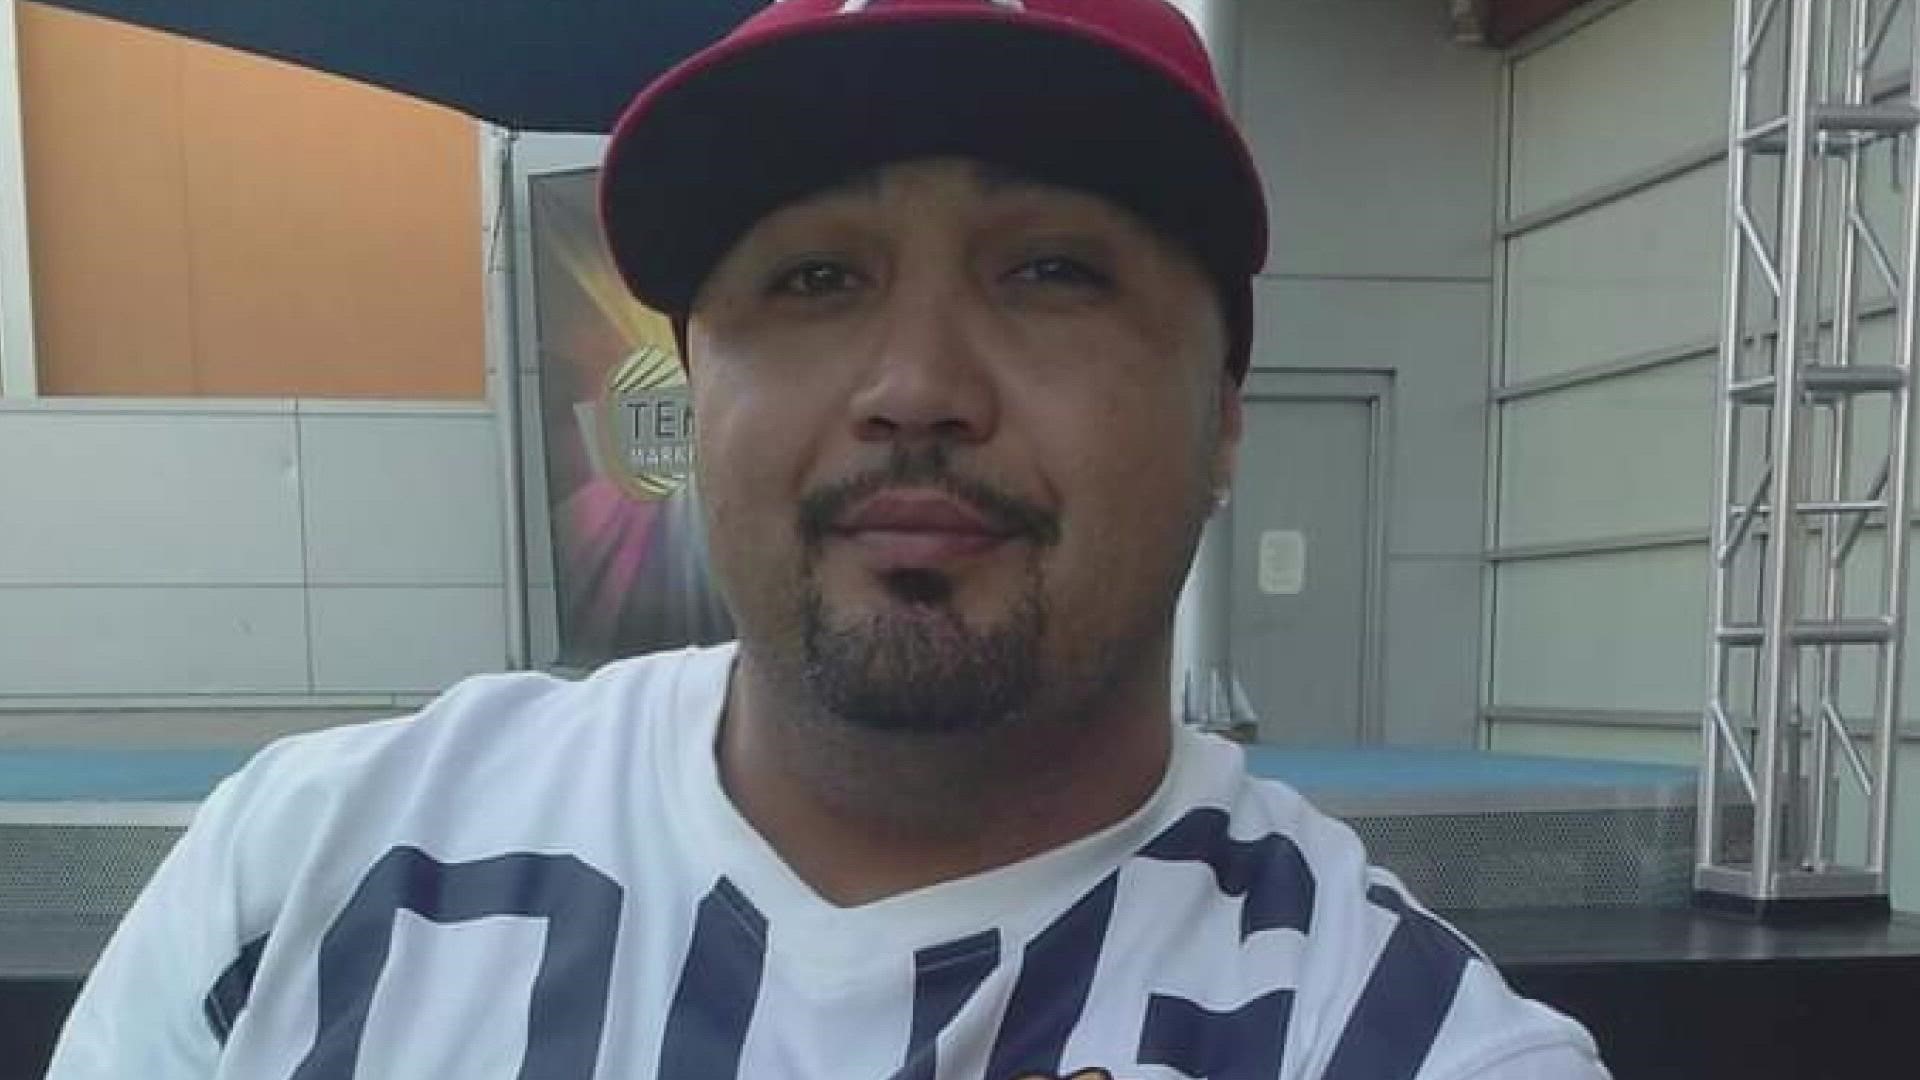 Victor Garcia was shot and killed near 89th Avenue and Heatherbrae Drive. The victim's family urges the public to submit any information related the to shooting.